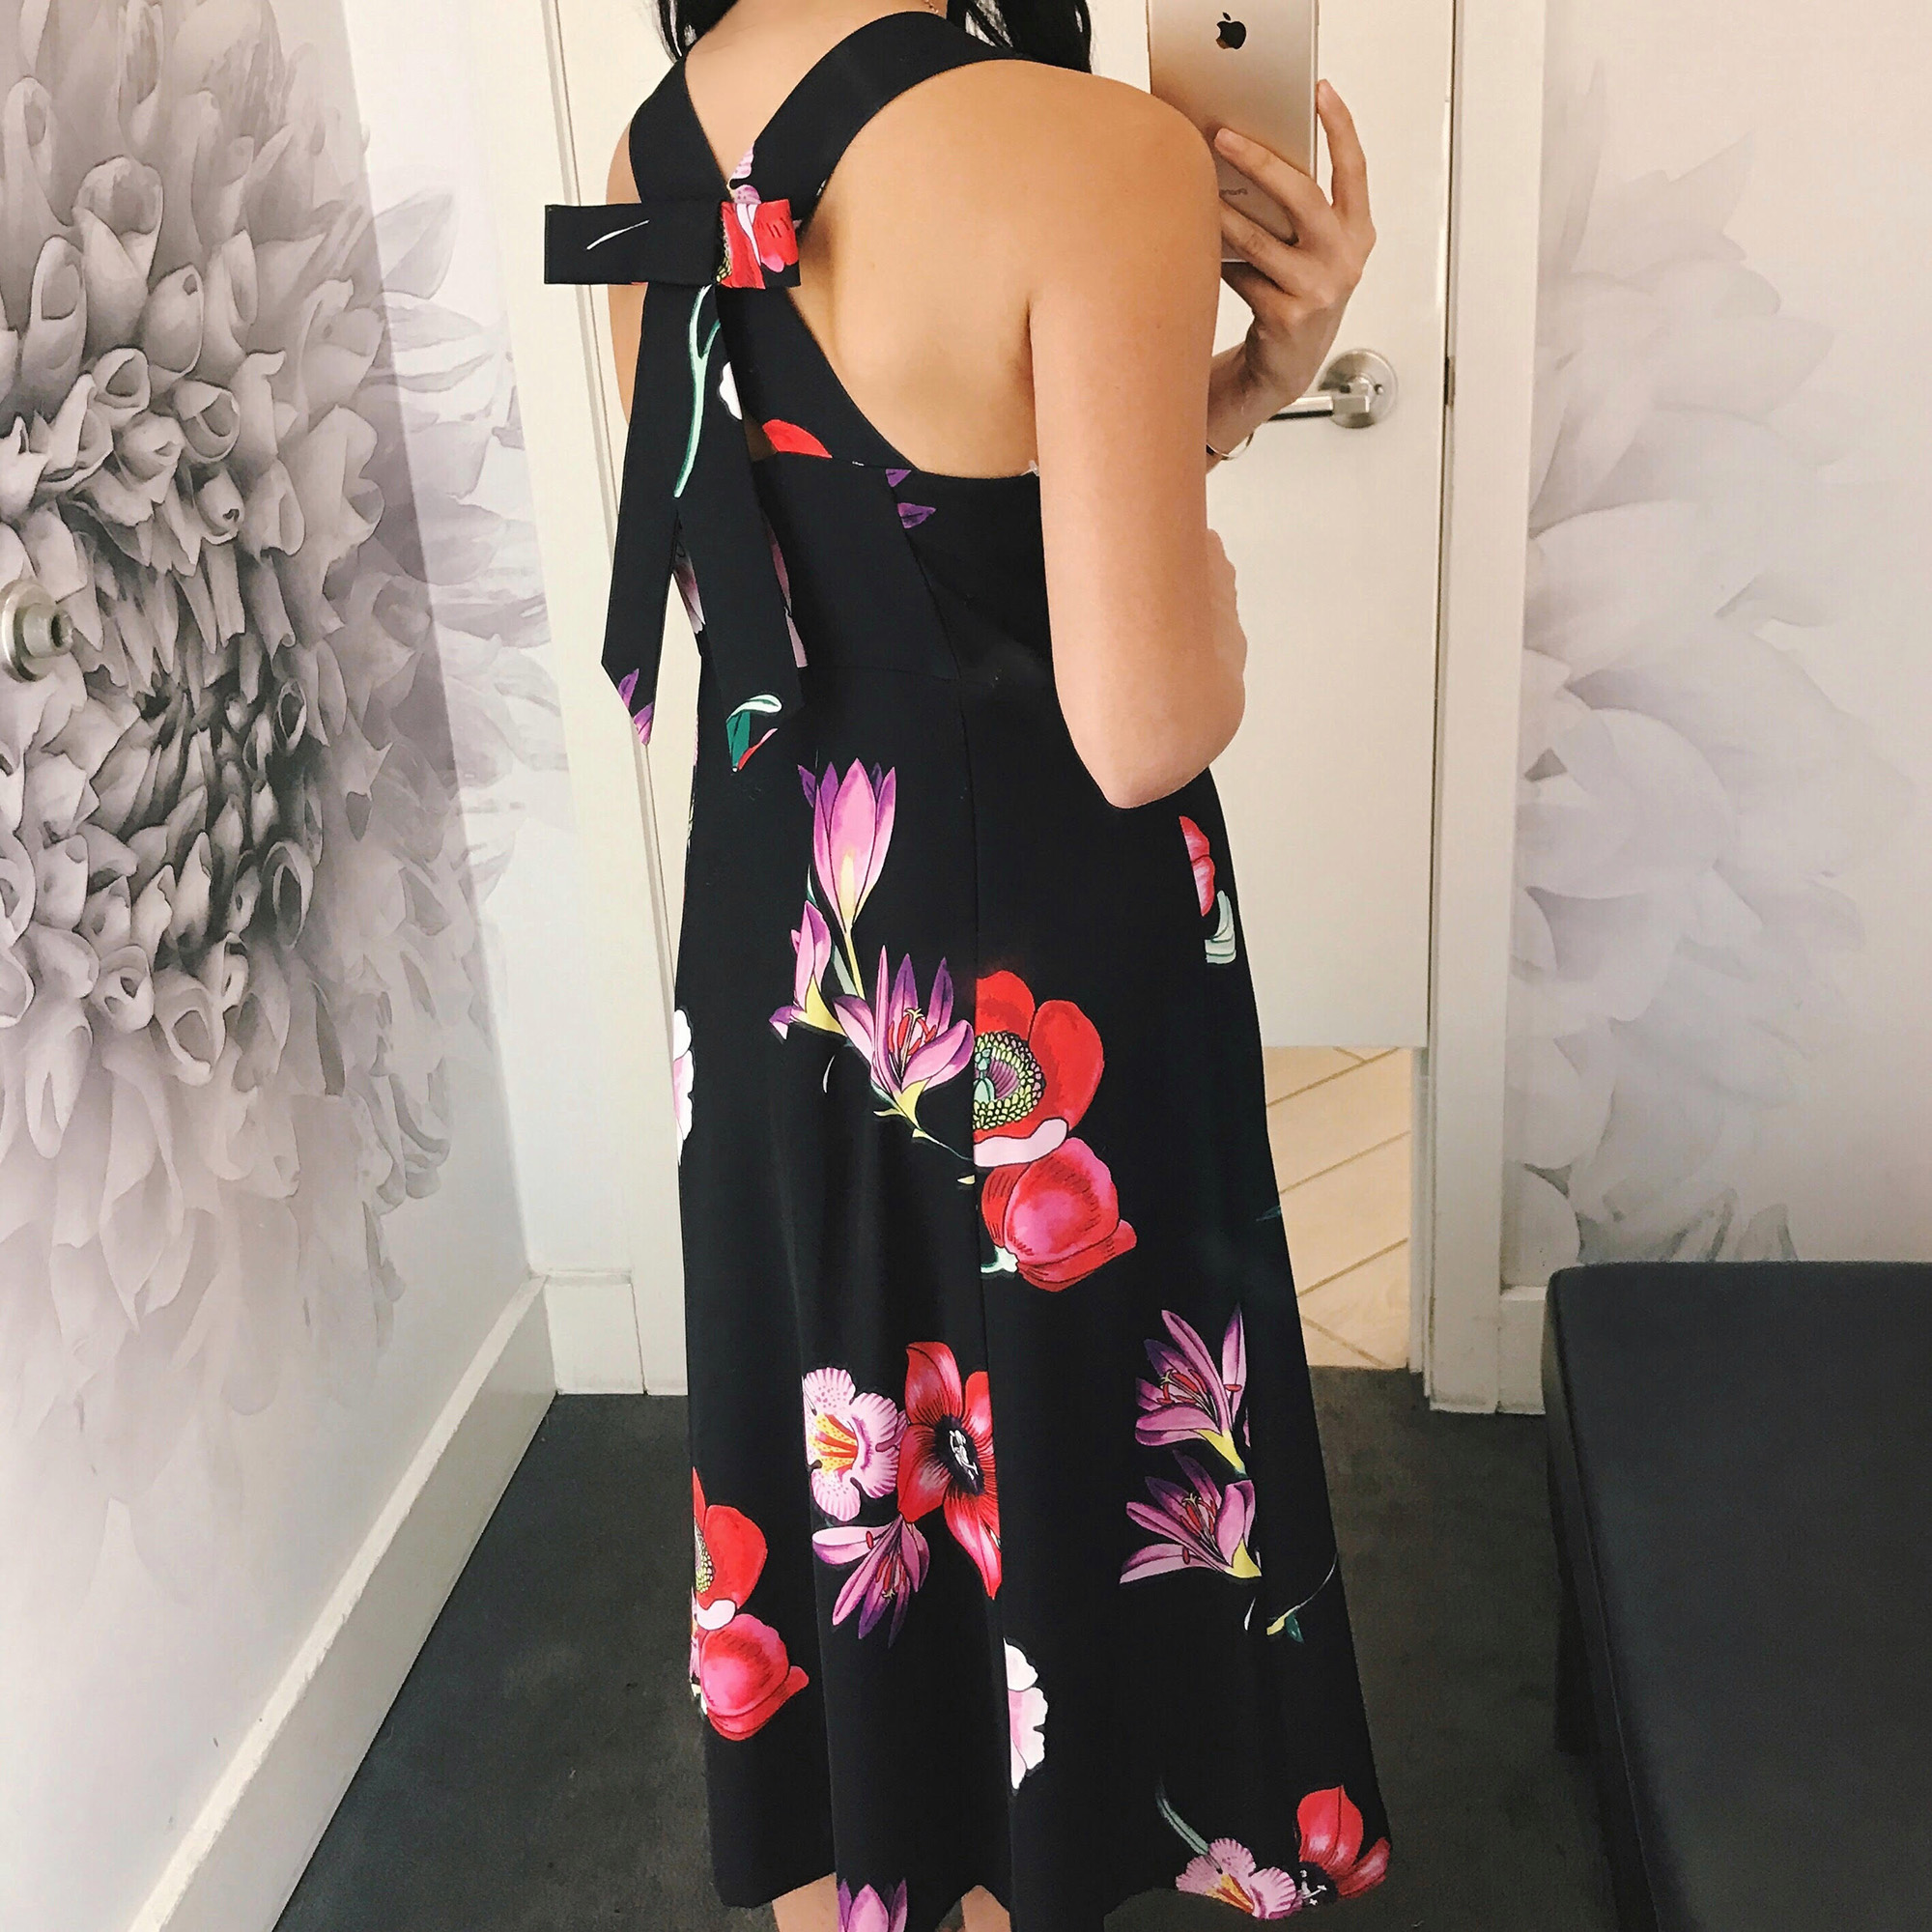 Skirt The Rules / Ann Taylor Fitting Room Review